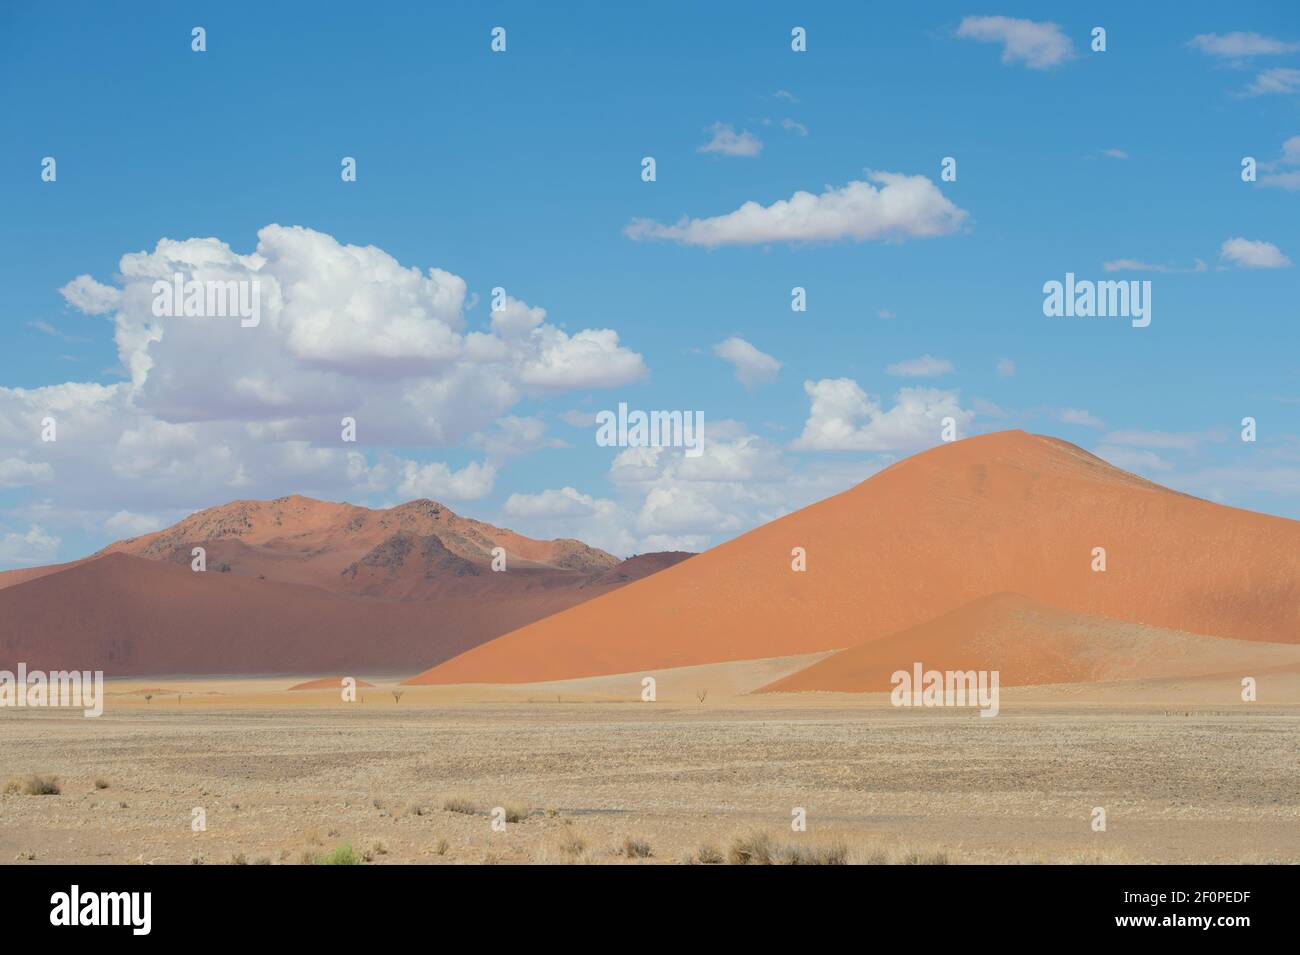 Sossusvlei desert landscape in Namibia Africa red sand dunes with blue sky and white clouds horizontal format room for type open space rule of thirds Stock Photo